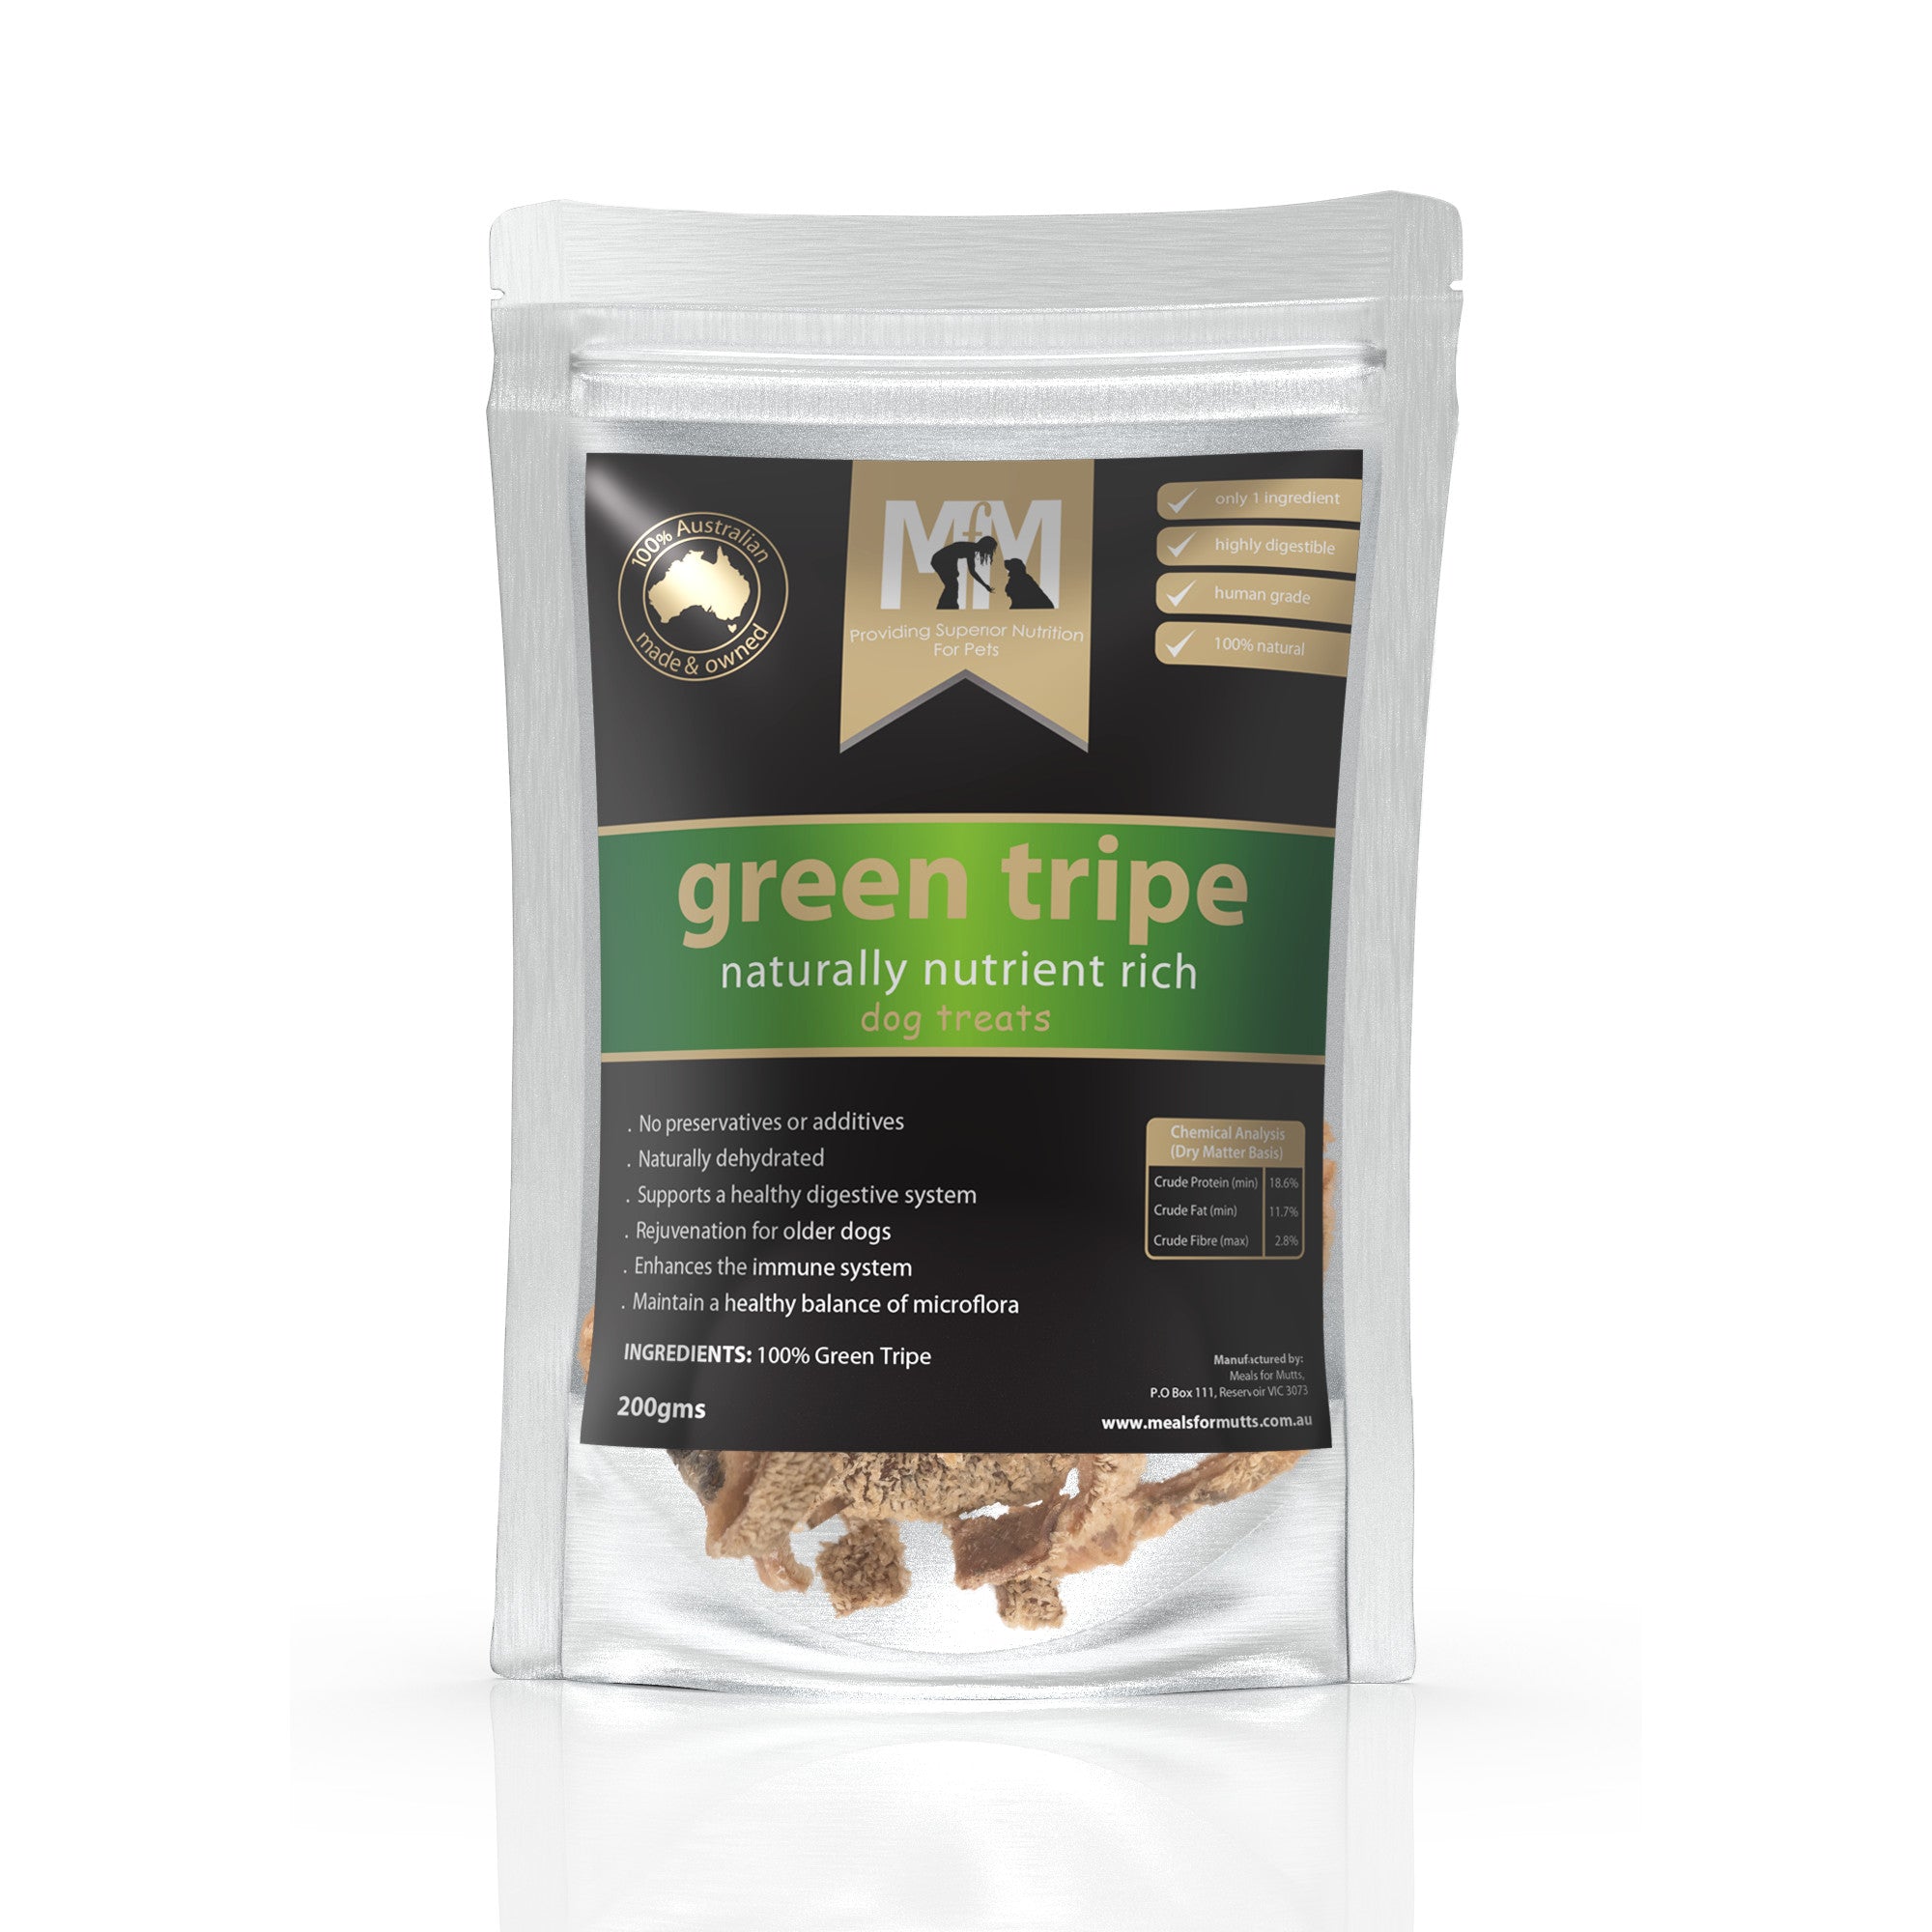 Meals for Mutts Green Tripe Dog Treats